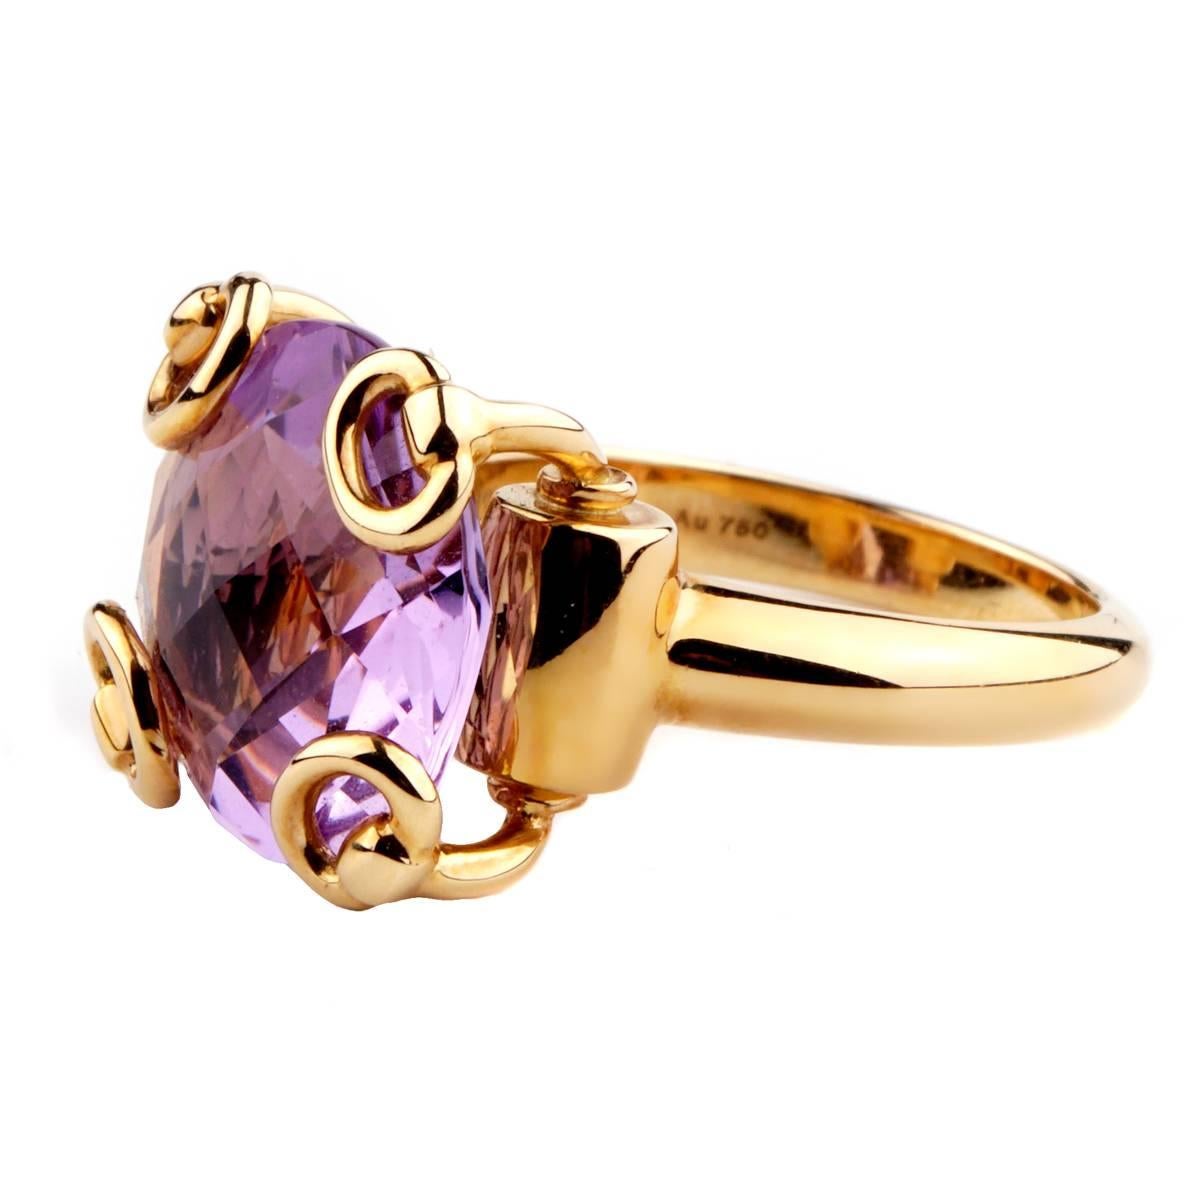 A fabulous Gucci ring showcasing a round checkerboard cut amethyst encased in 18k yellow gold.

Size 6.25 